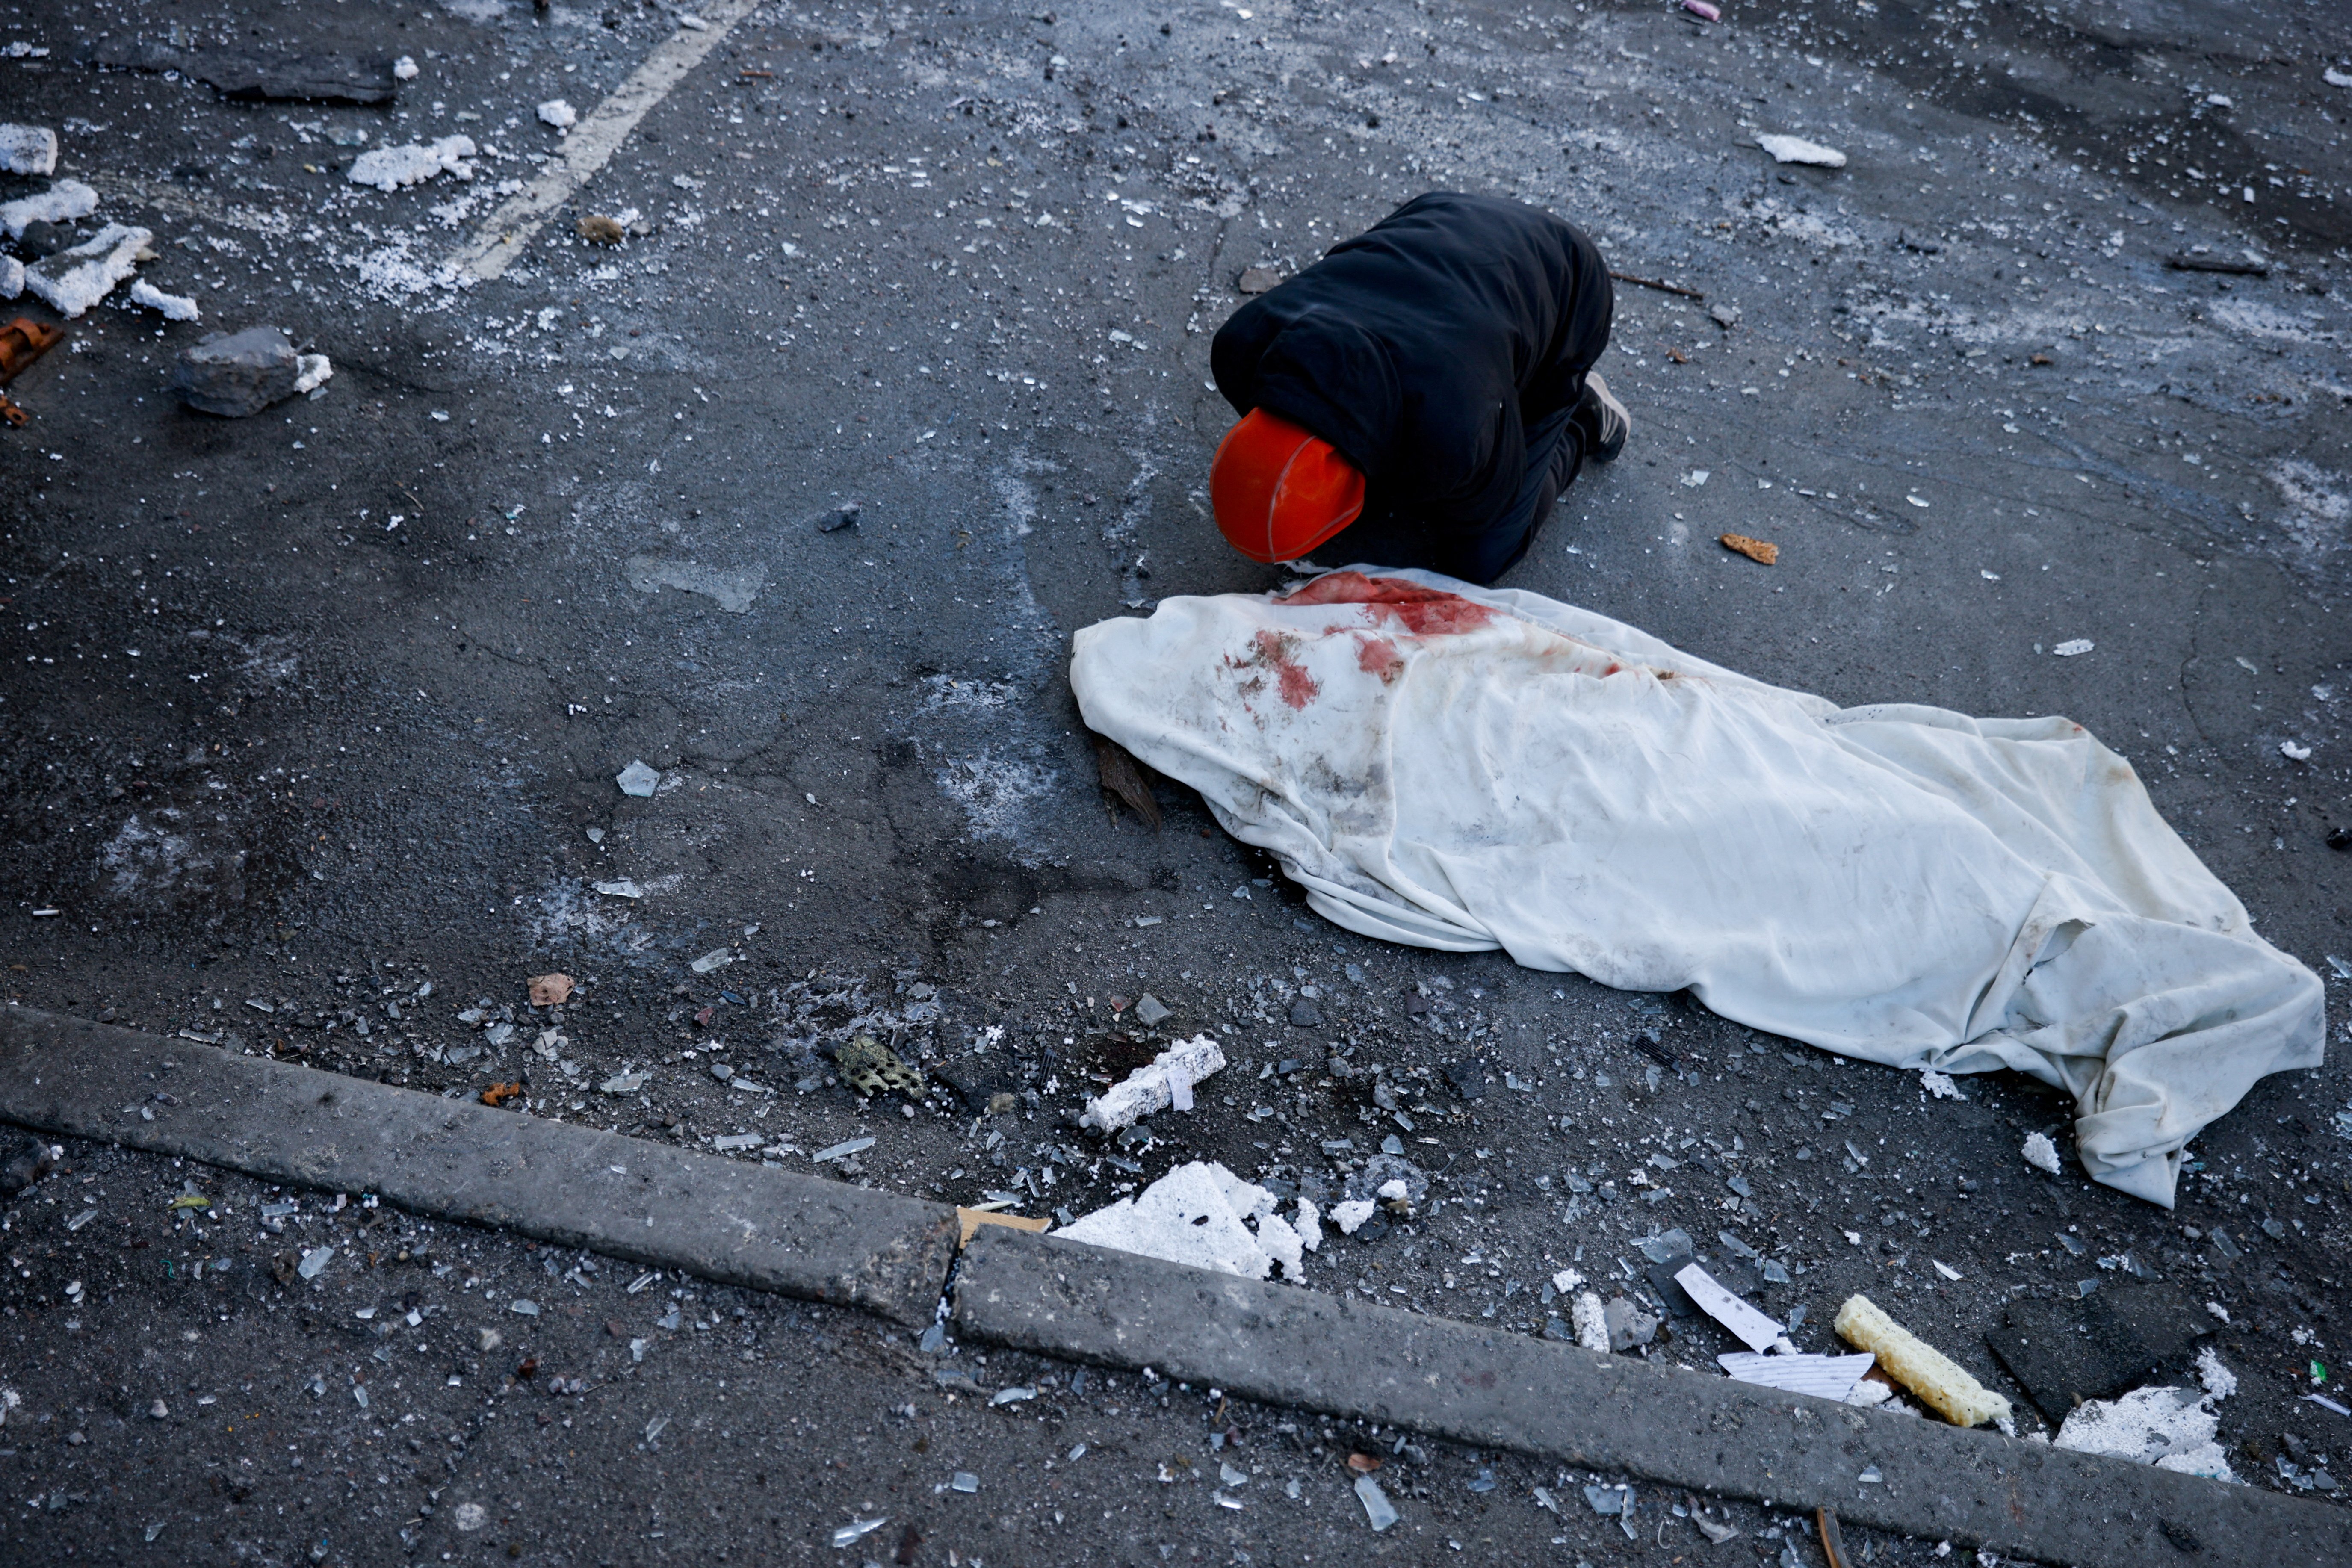 A man in Kyiv, Ukraine, mourns his mother, who was killed when an intercepted missile hit a residential building March 17, 2022. (CNS photo/Thomas Peter, Reuters)